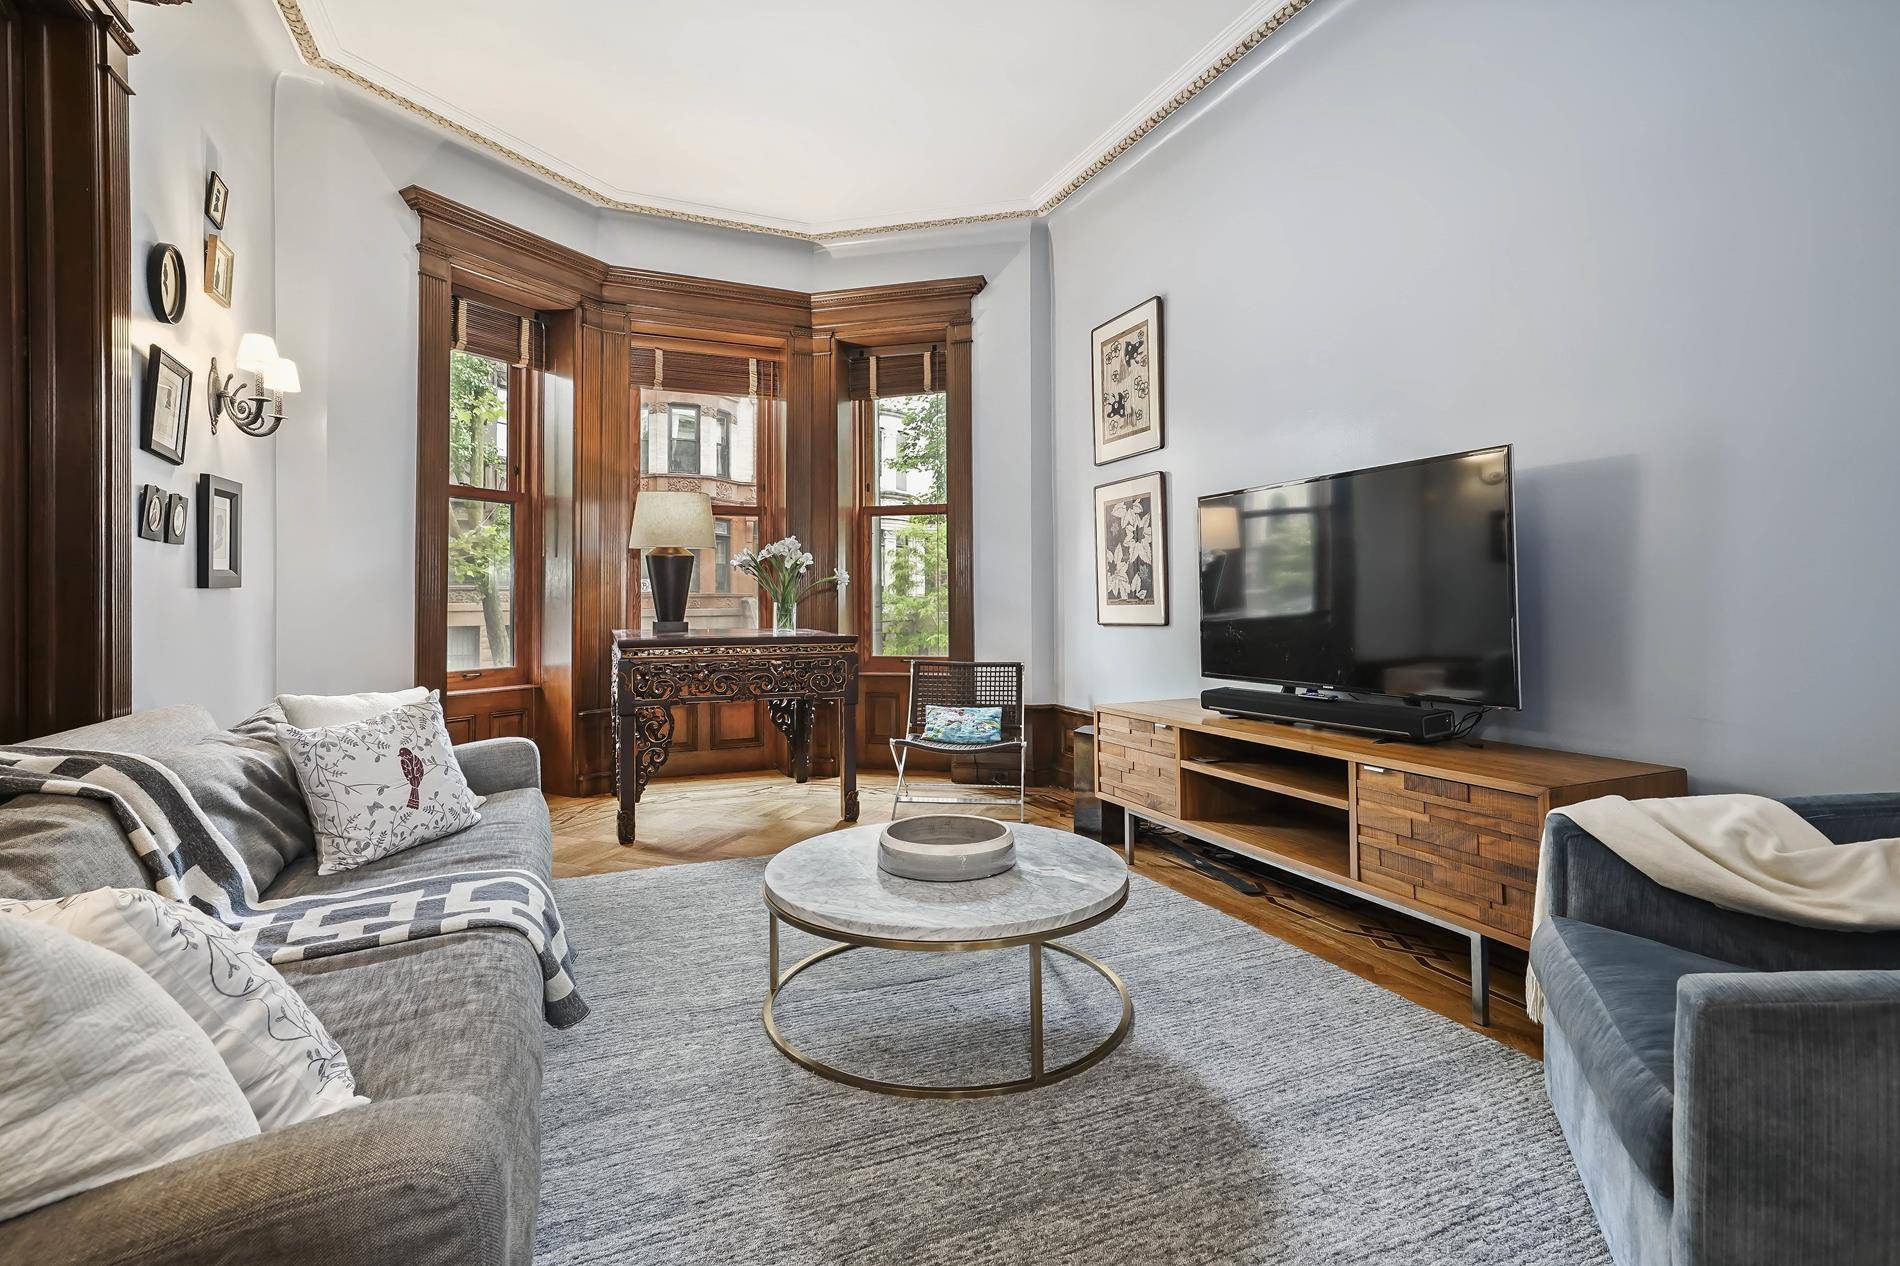 Found among a row of limestone townhouses designed with full height curved bays, opulent L shaped stoops and Neo Italian Renaissance style on one of the prettiest Park Slope streets ...